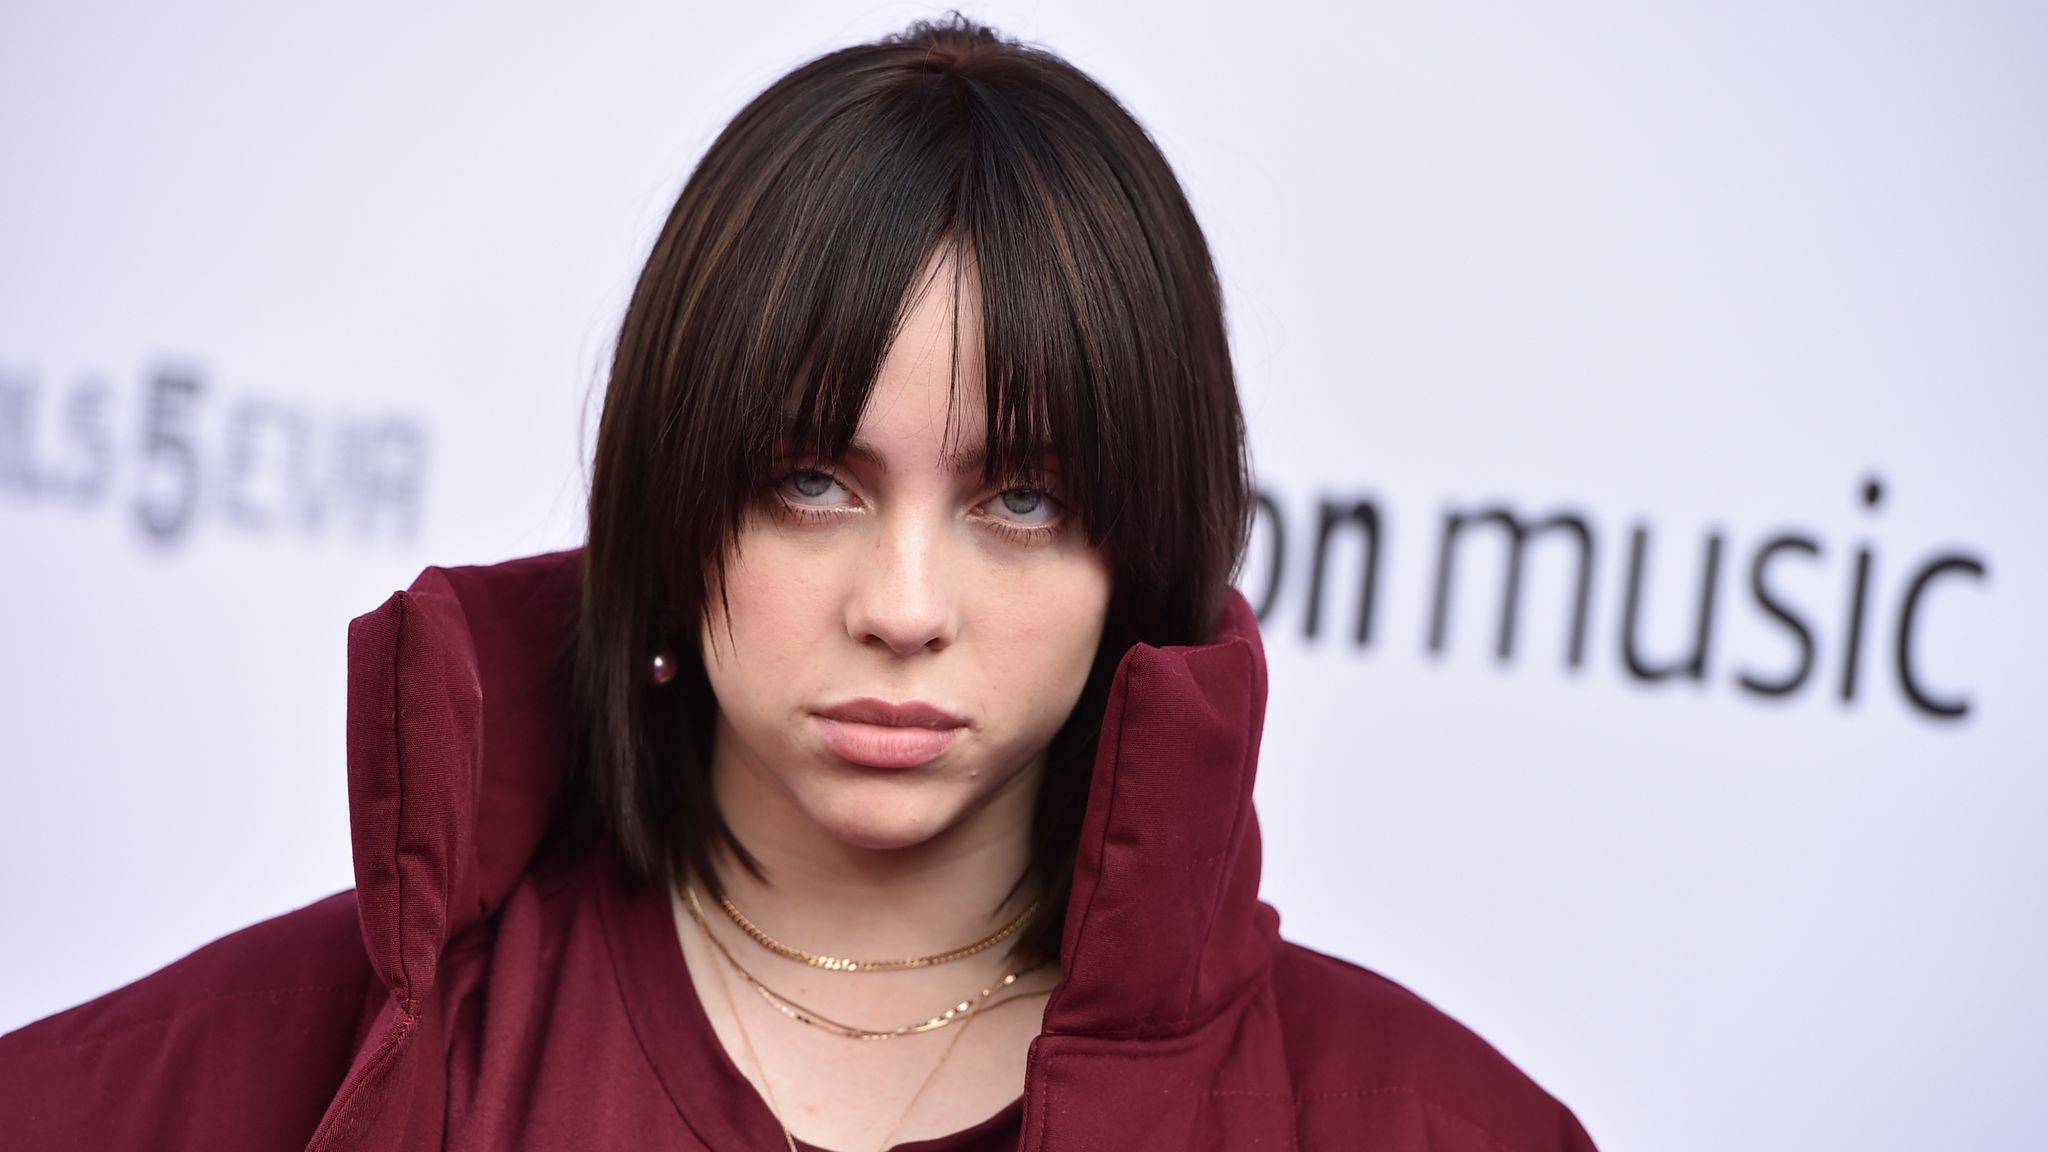 Pron Hd Jaklin - Billie Eilish says watching porn from the age of 11 'destroyed my brain' |  Ents & Arts News | Sky News